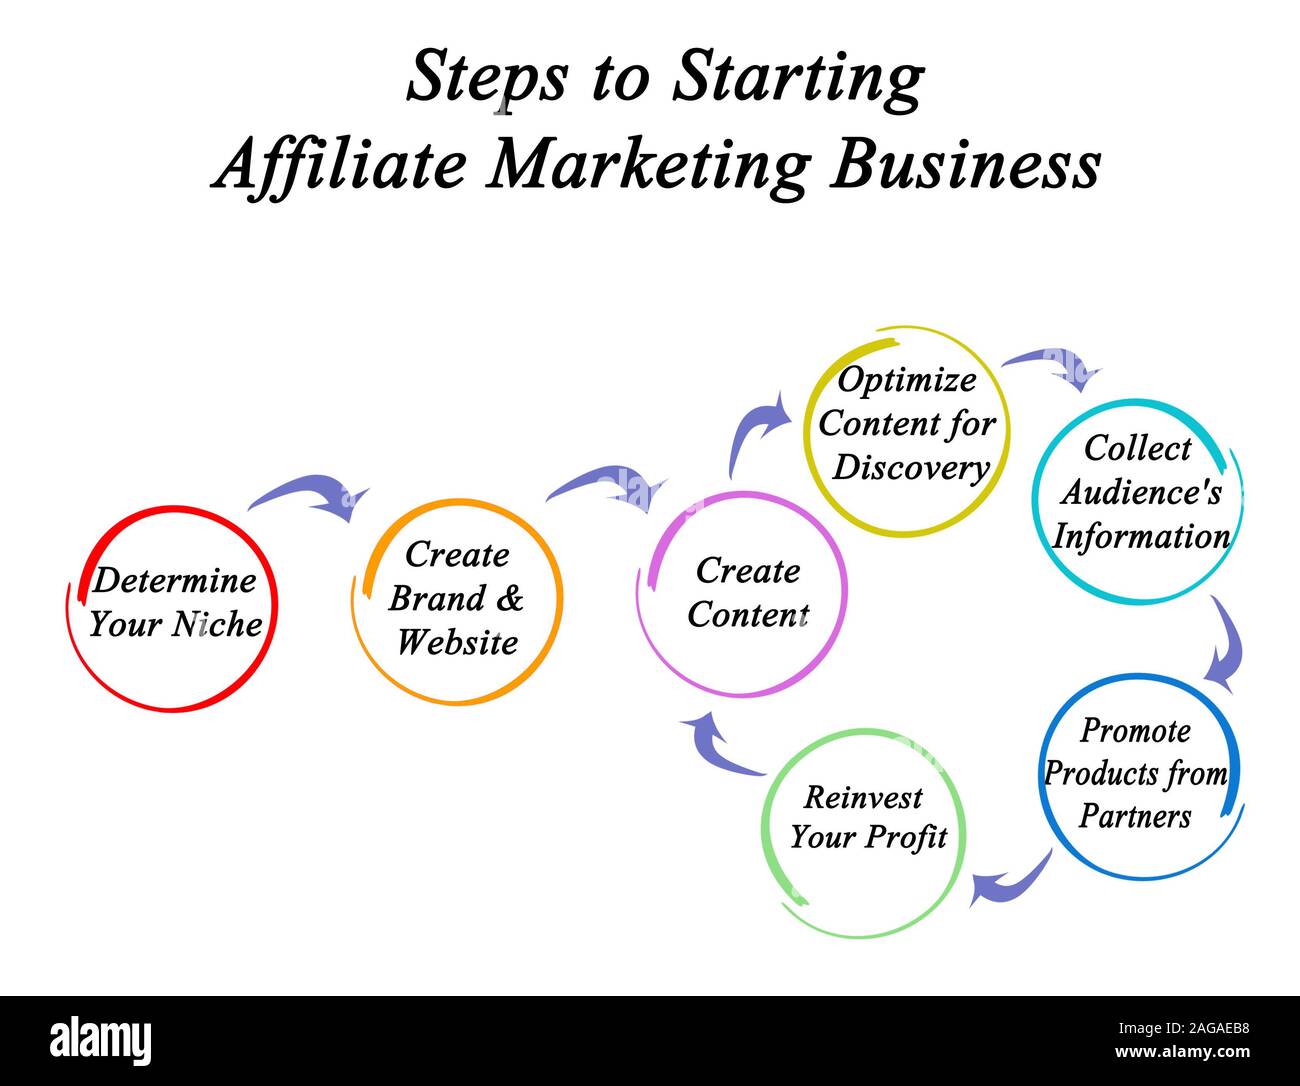 Affiliate Marketing for Startups: The Essentials